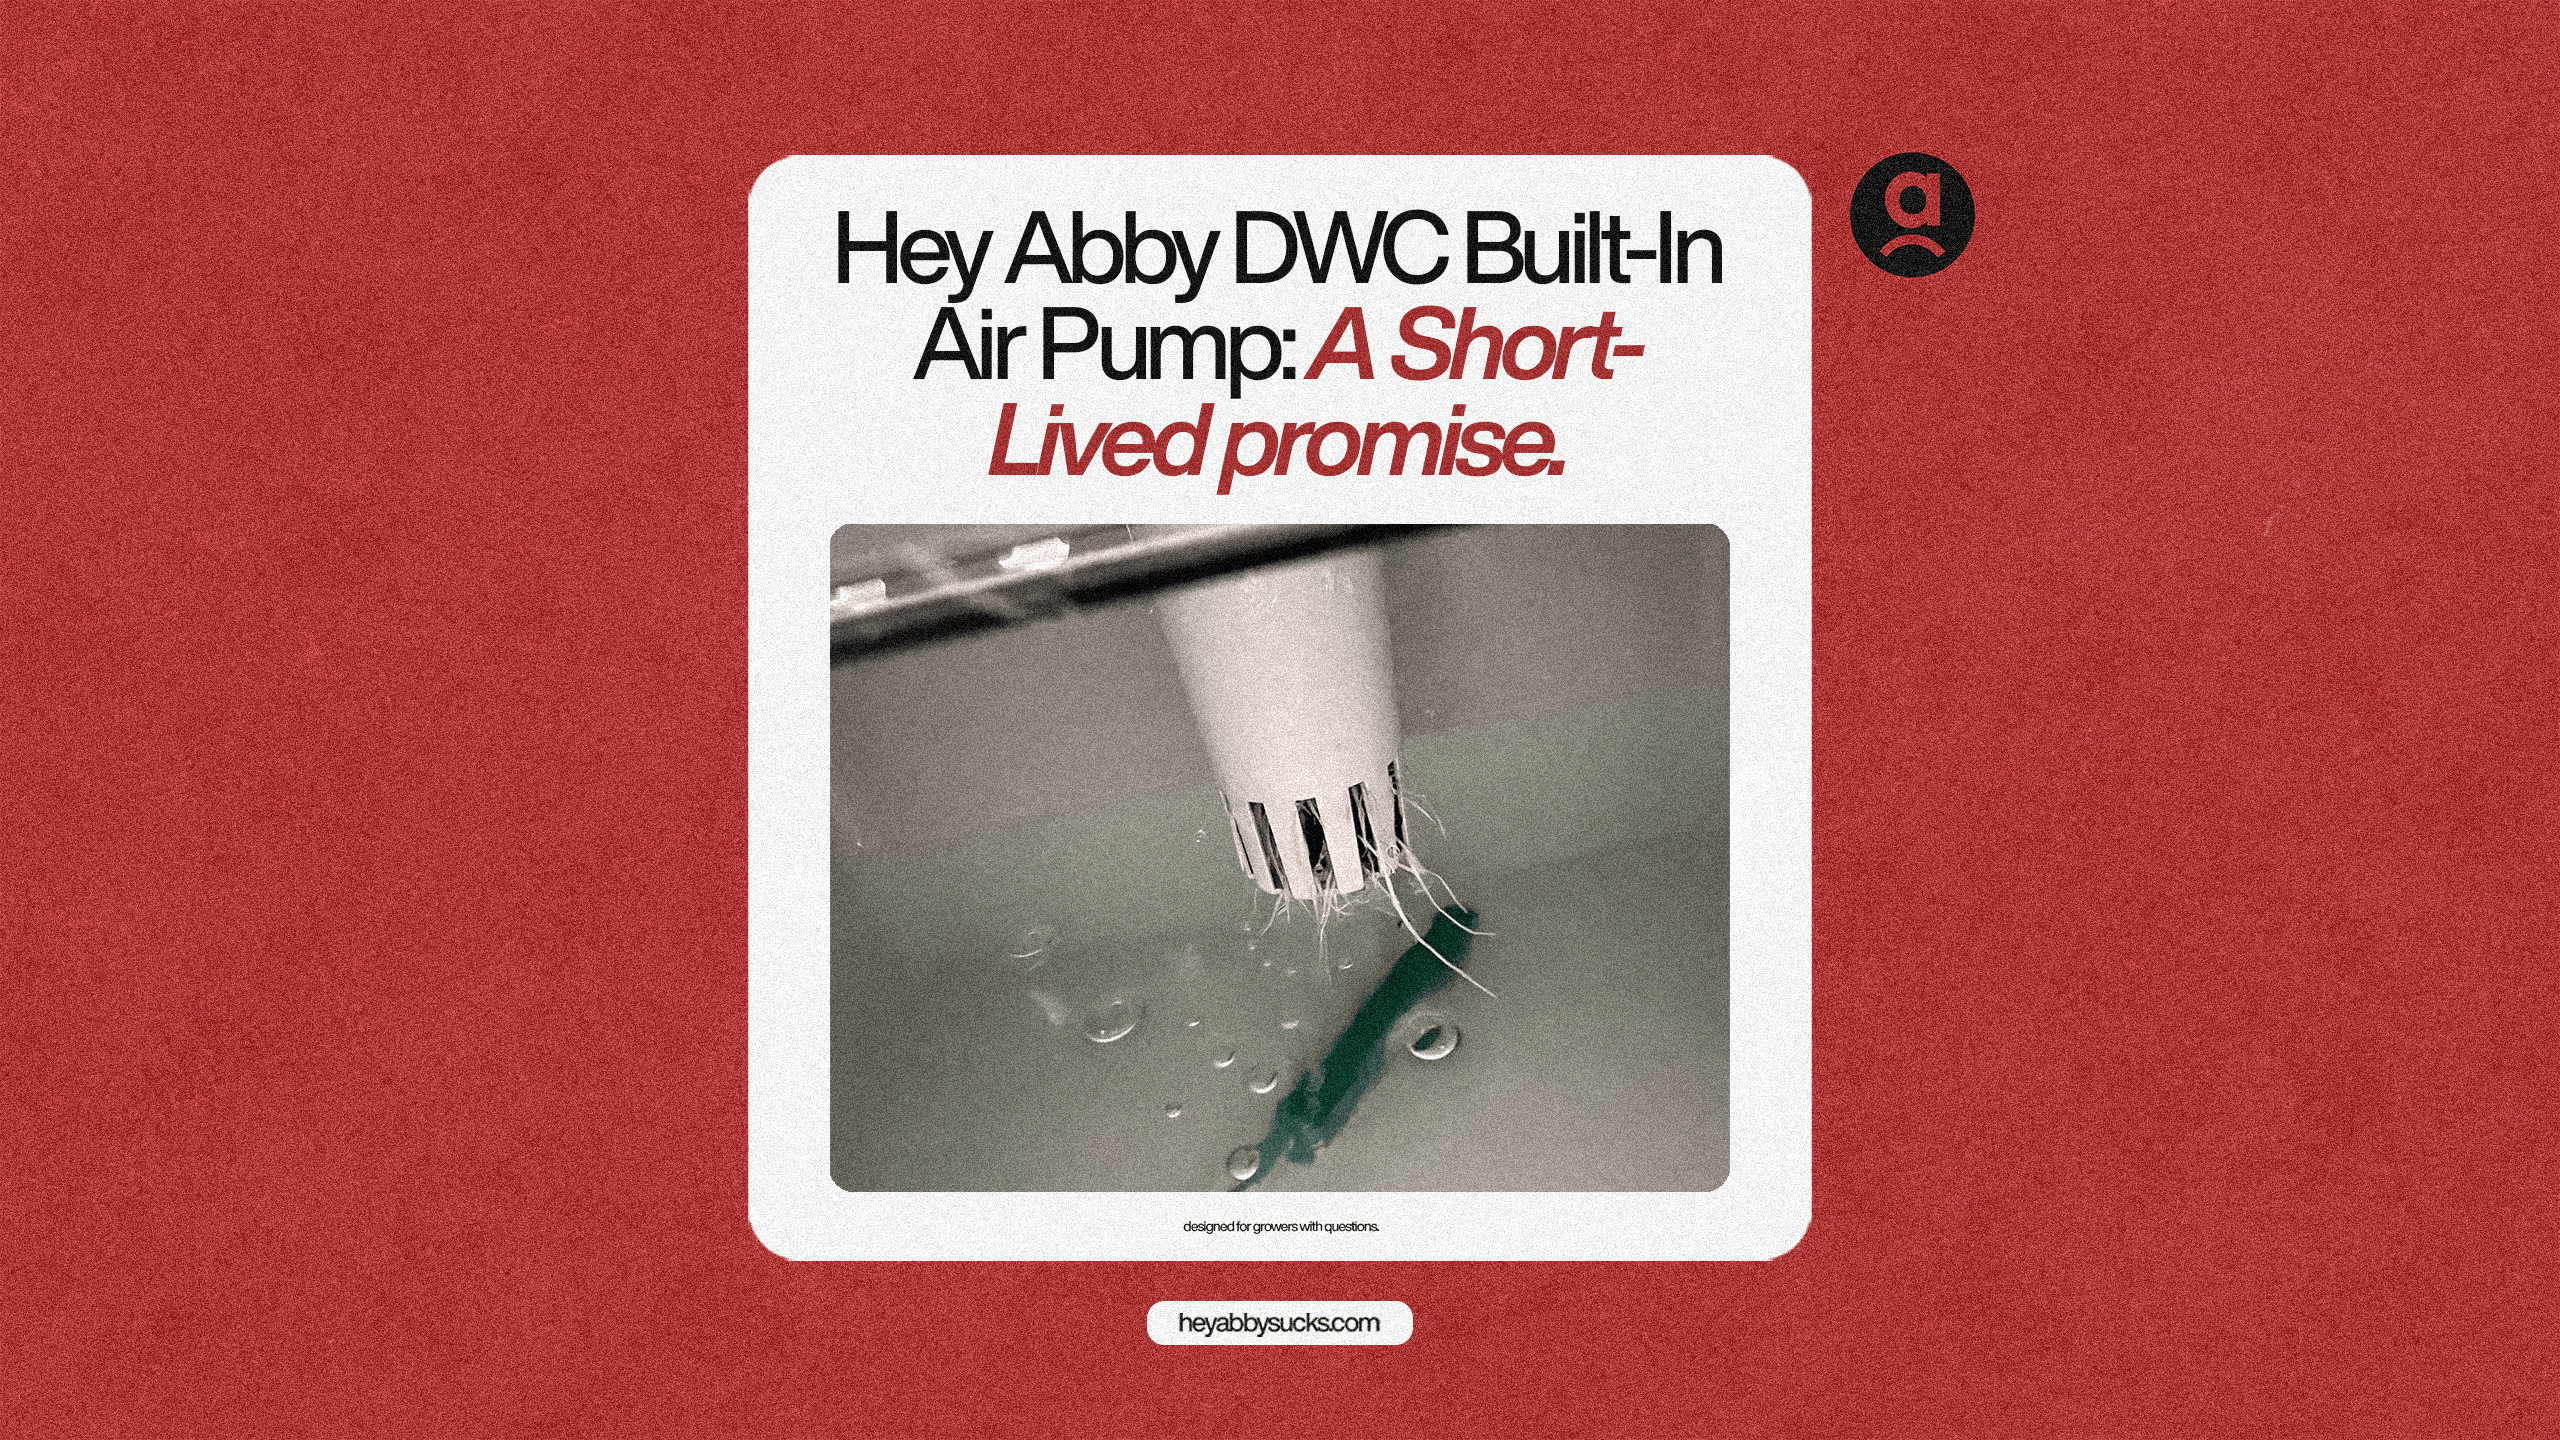 The Hey Abby DWC Built-In Air Pump: A Short-Lived Promise